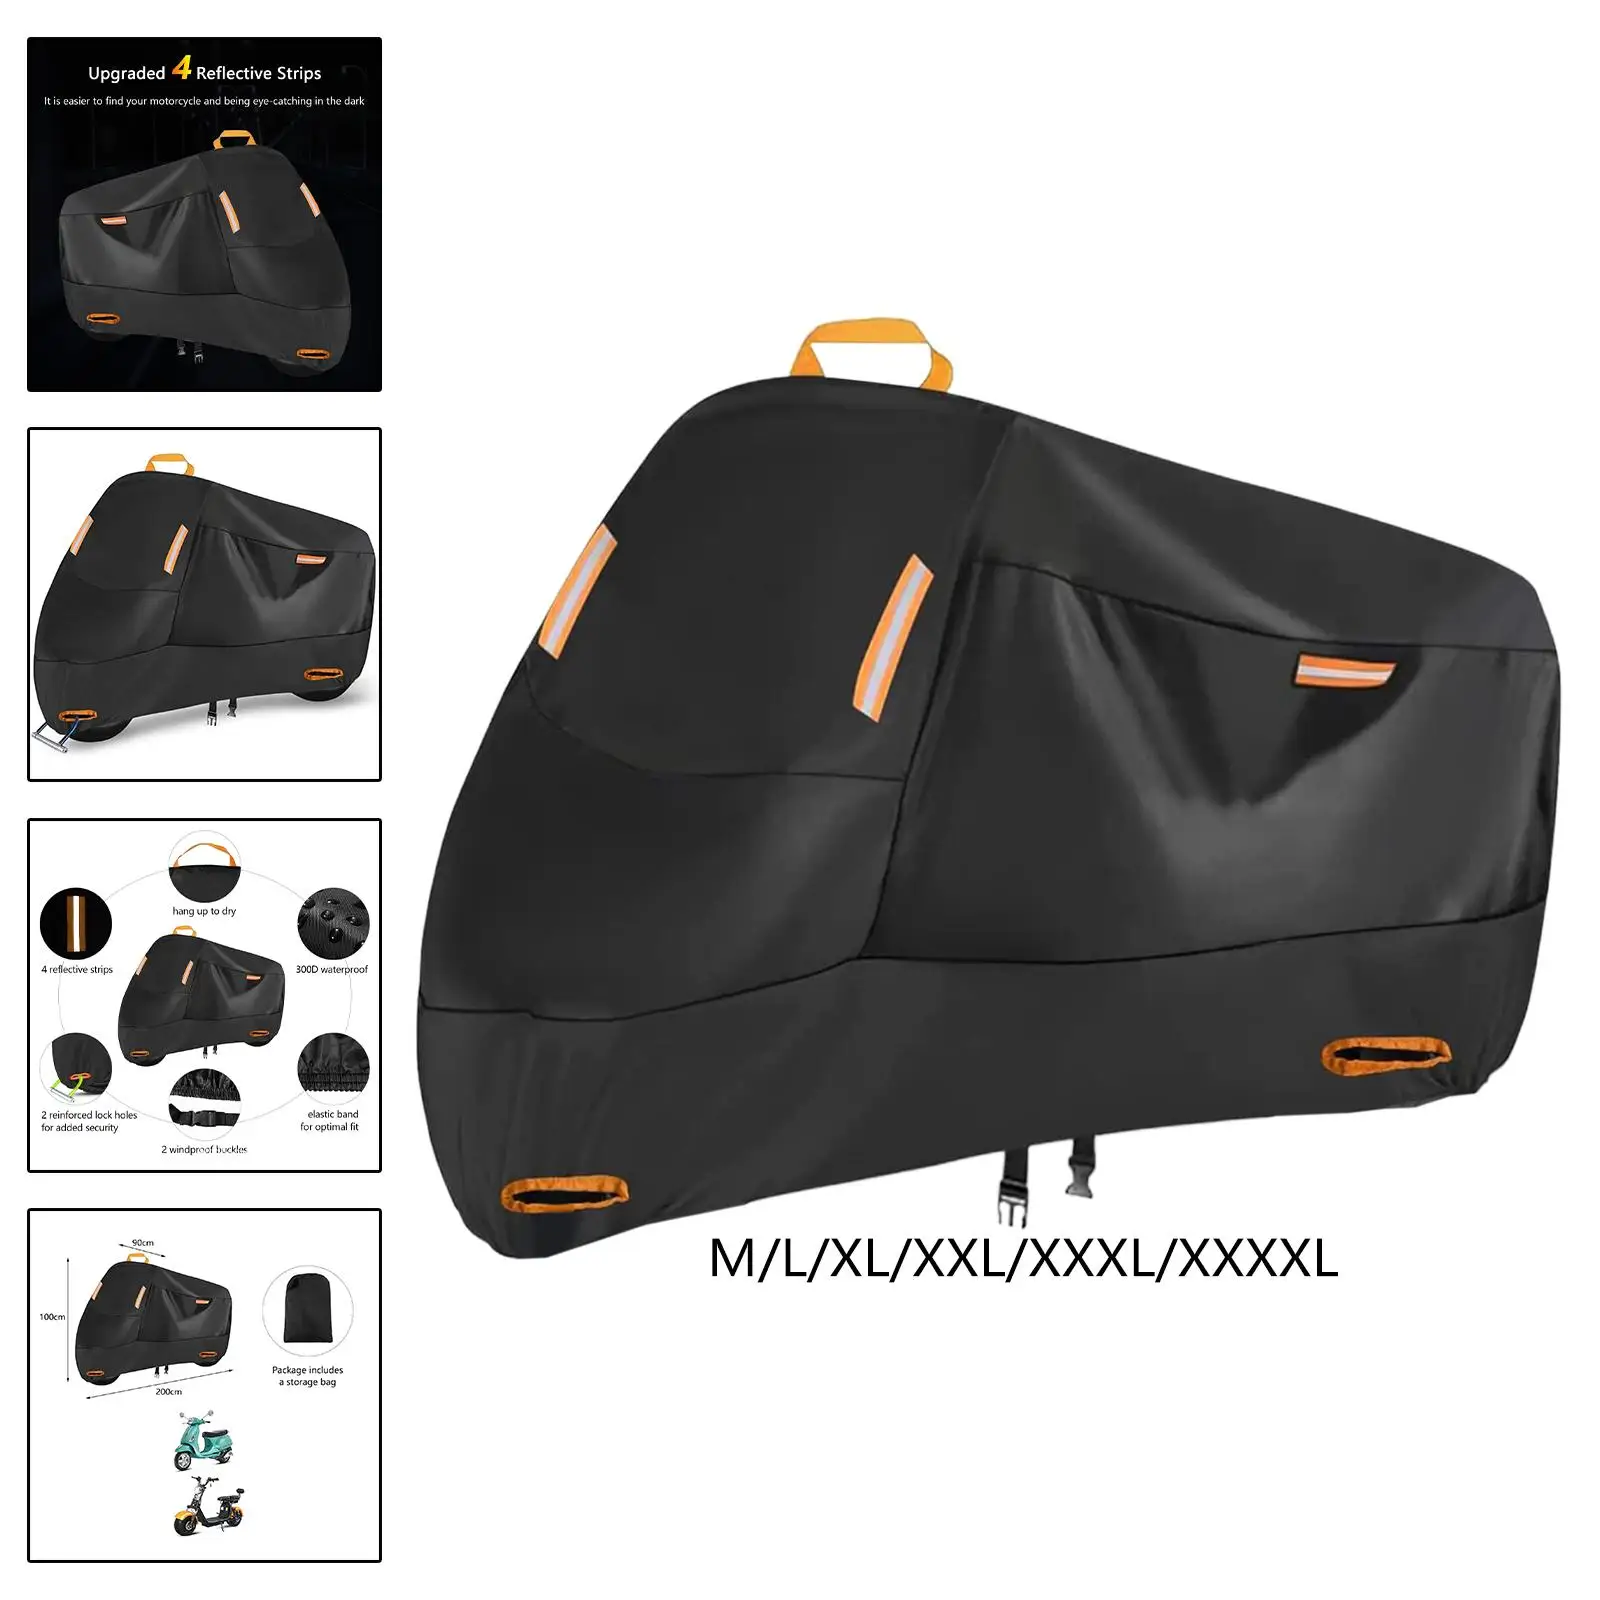 Motorcycle Cover Dustproof with 4 Reflective Strips Scooter Cover Motorbike Cover for Bike Motorbike Outdoor Protection